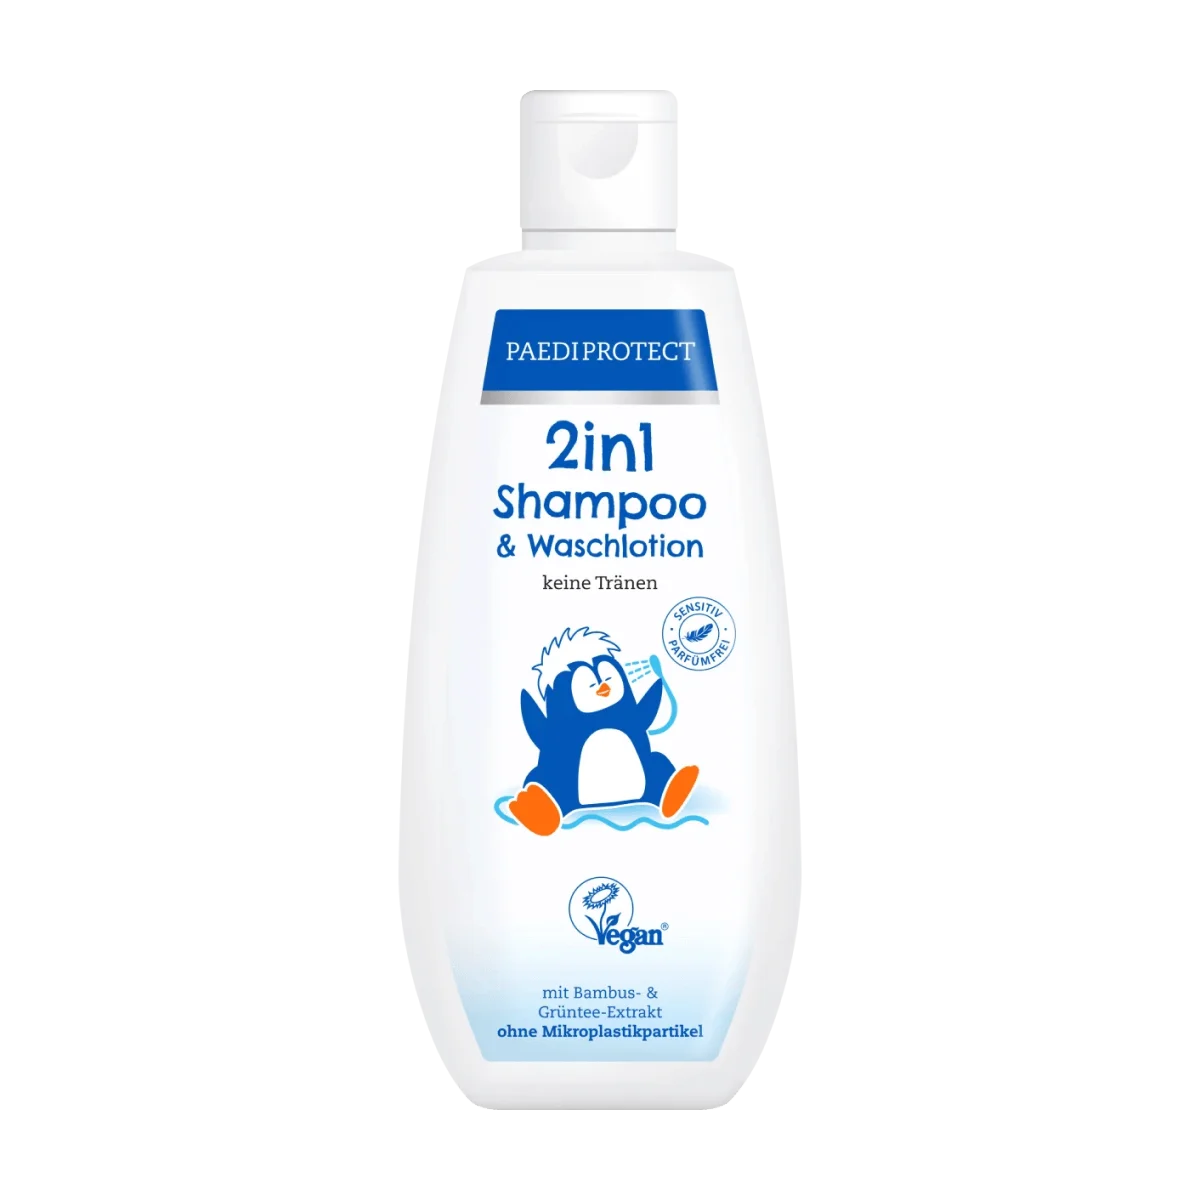 PAEDIPROTECT Baby Shampoo & Waschlotion 2in1, 200 ml